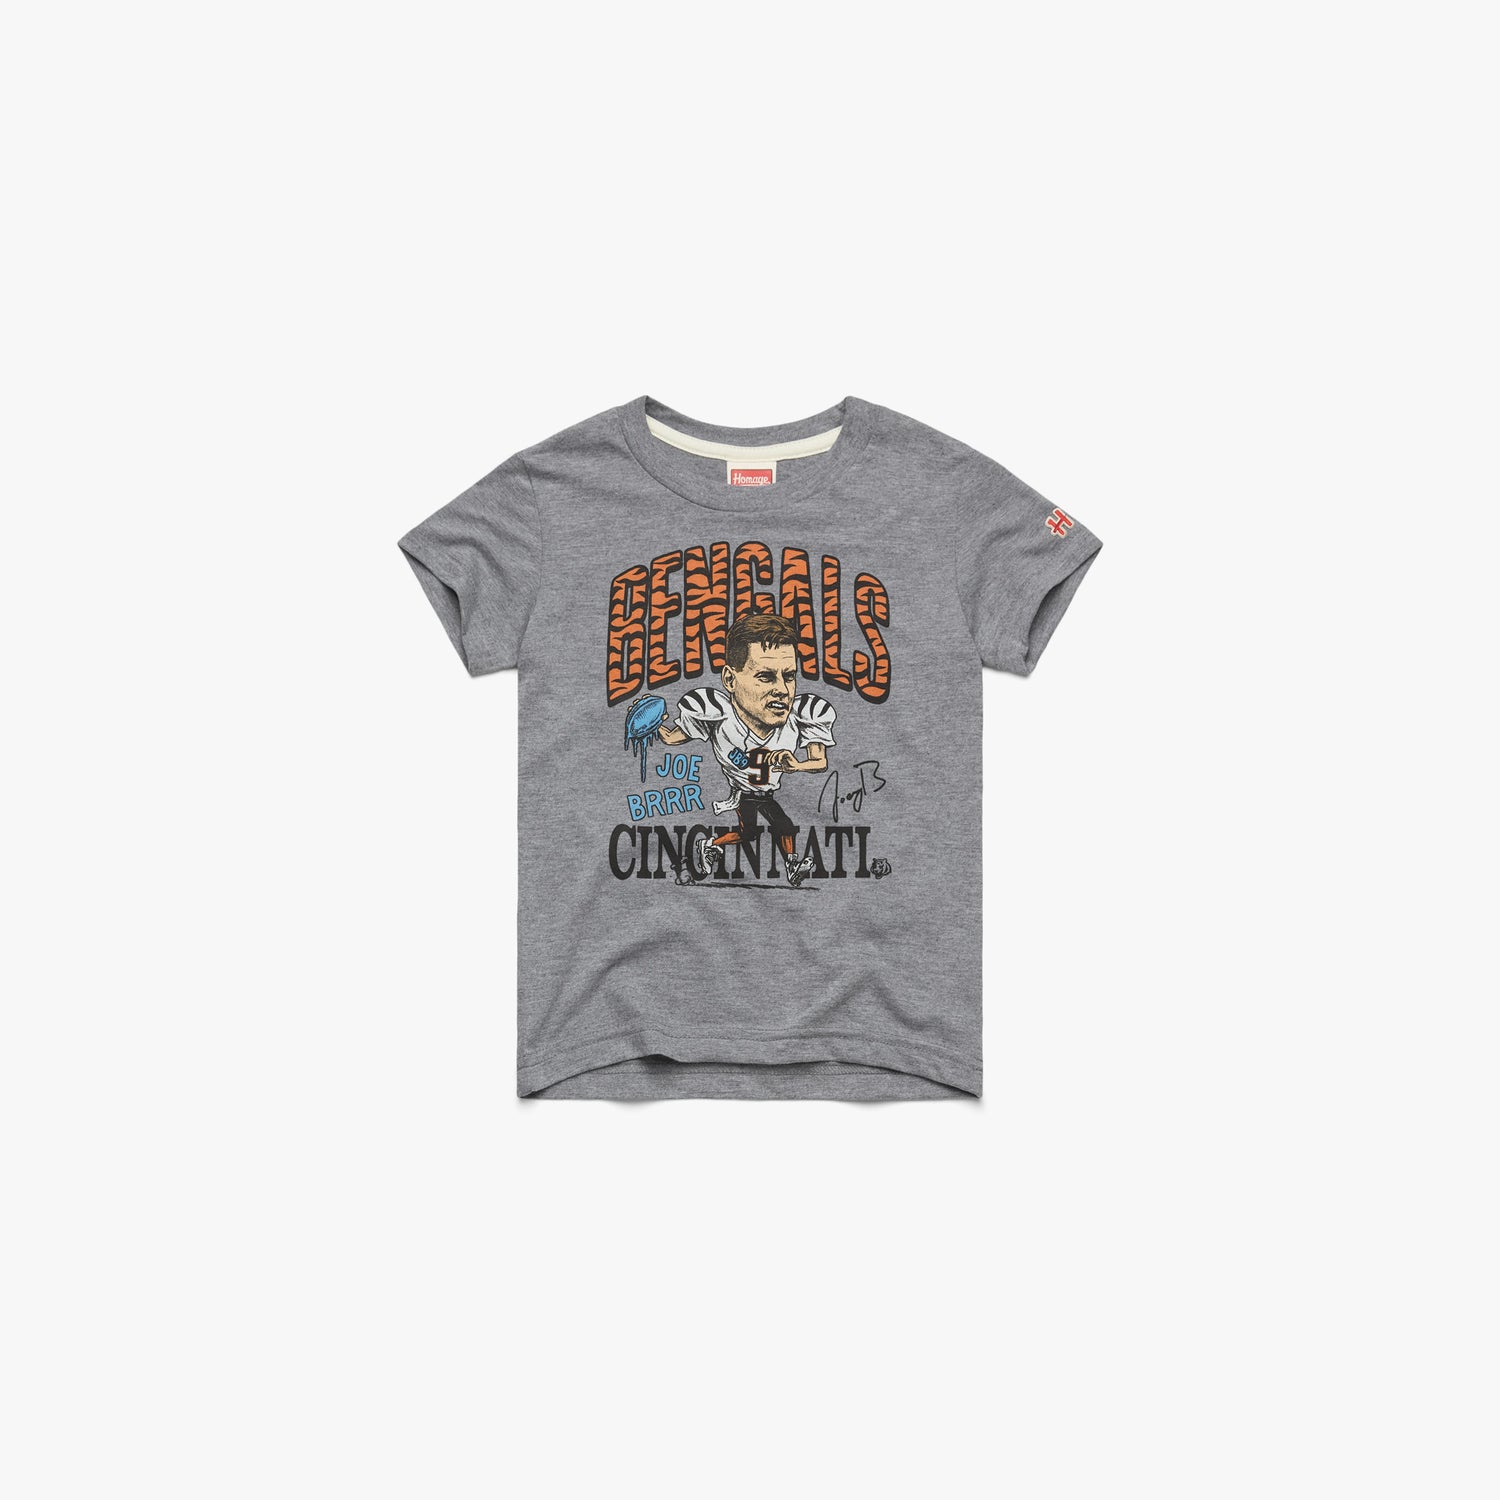 Youth Cincinnati Bengals Joe Burrow Signature Youth T-Shirt from Homage. | Officially Licensed Vintage NFL Apparel from Homage Pro Shop.